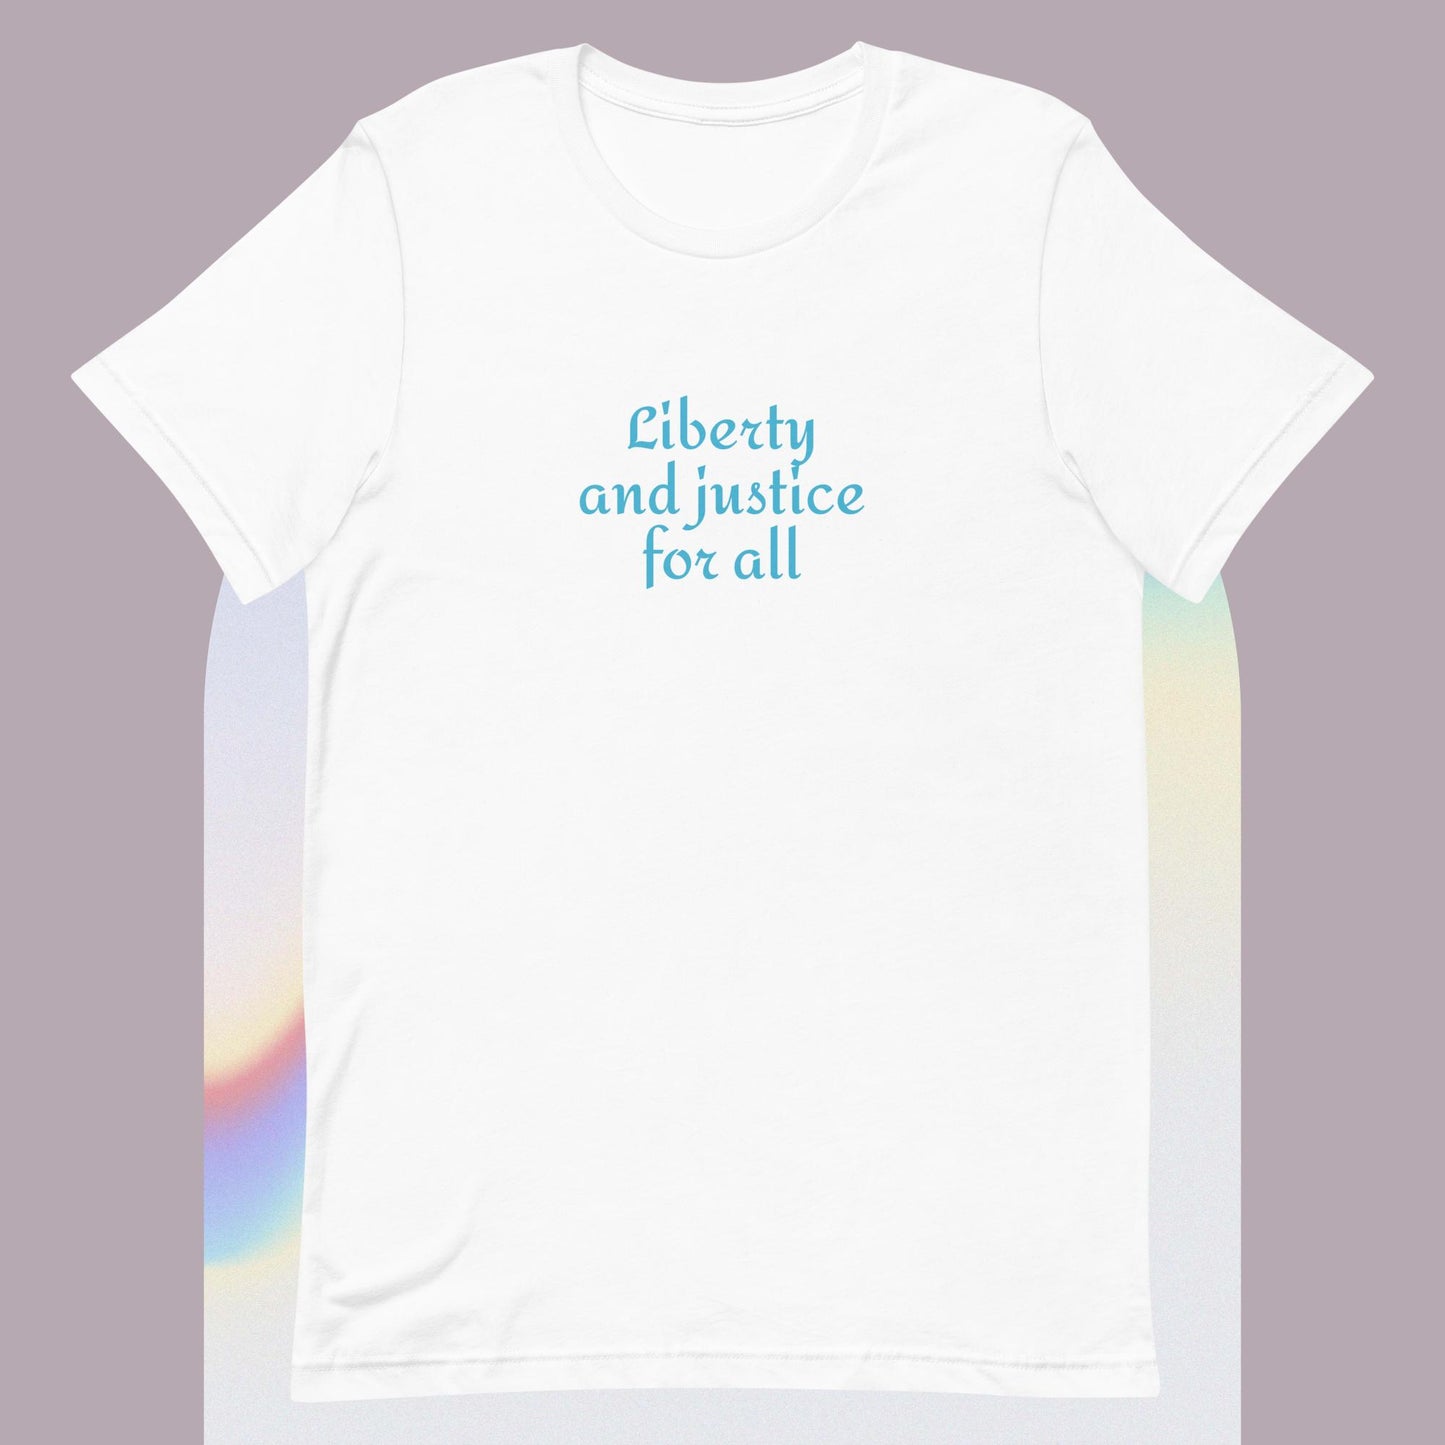 Liberty and justice for all, Unisex t-shirt